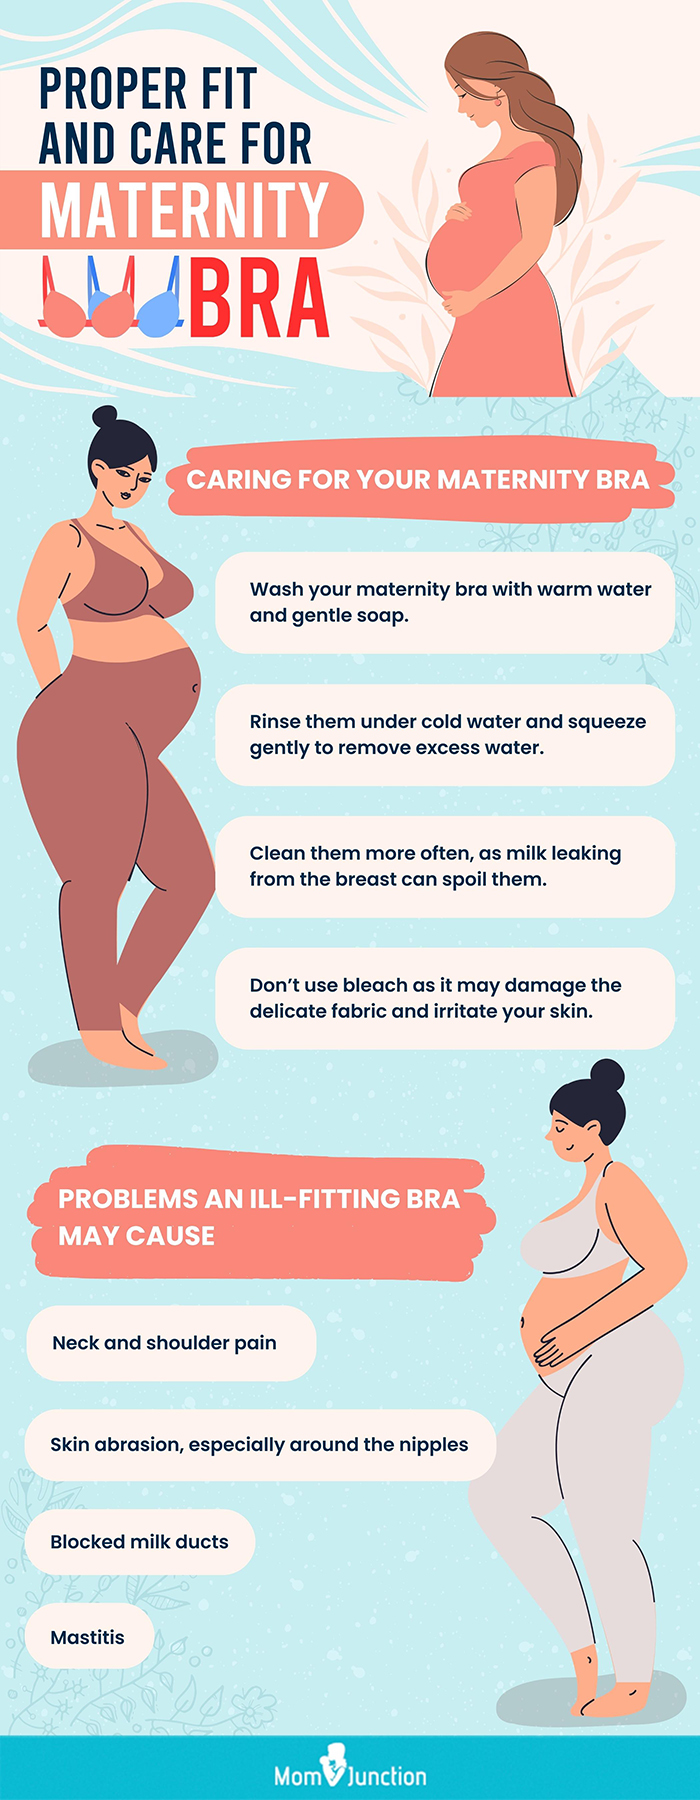 What type of bra is comfortable for women after pregnancy? - Quora